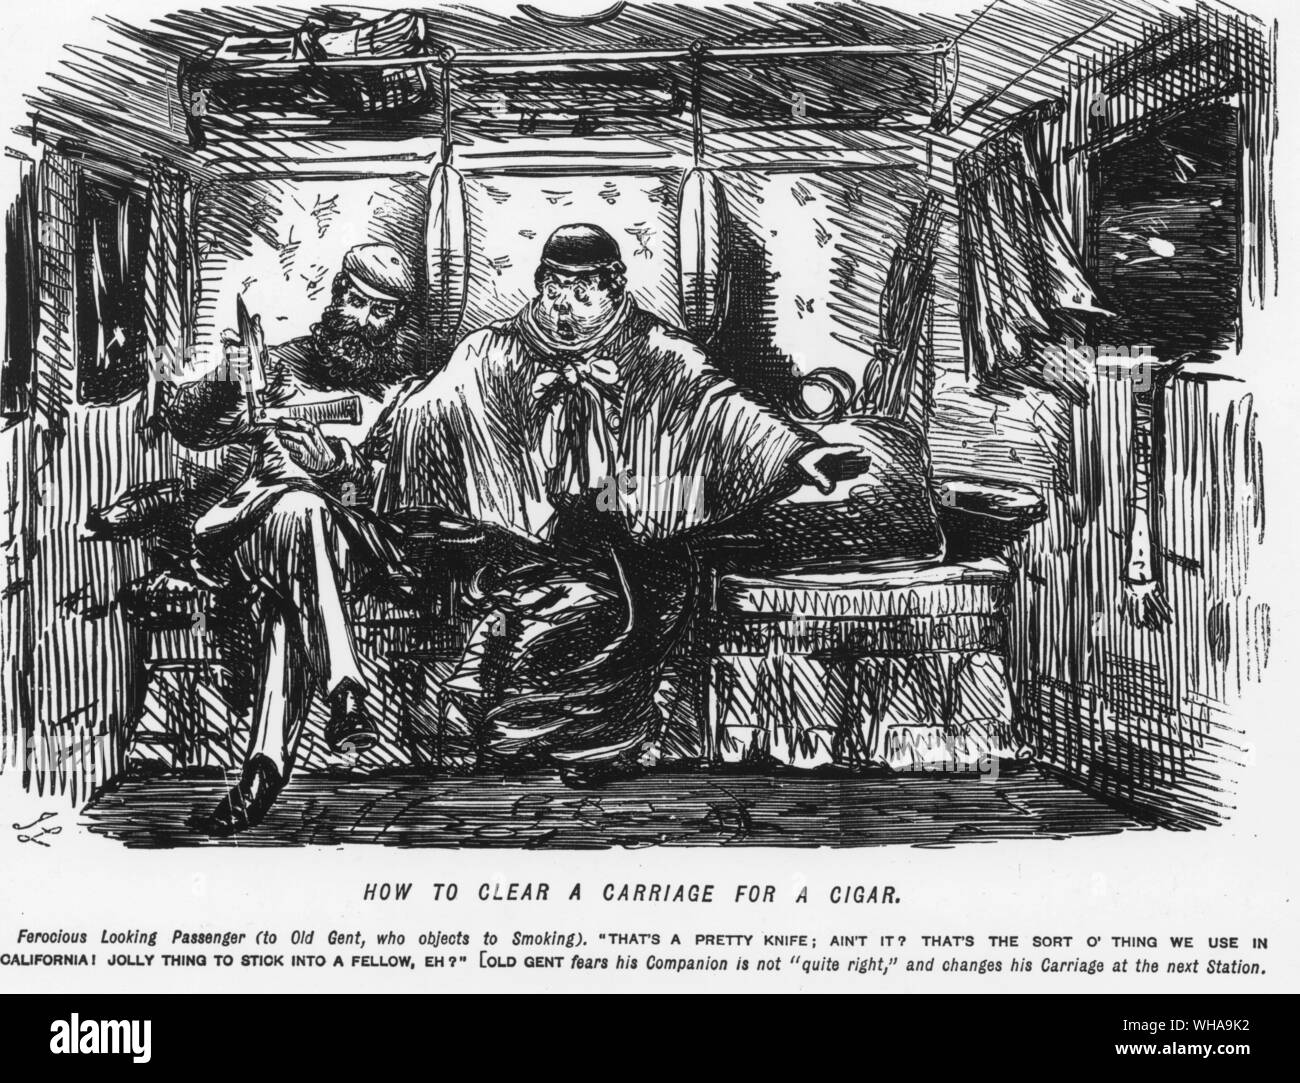 How to clear a carriage for a cigar. Ferocious looking Passenger ( to old Gent, who objects to smoking ) Thats a pretty knife aint it? Thats the sort o thing we use in California! Jolly thing to stick into a fellow, eh?. Old gent fears his companion is not 'quite right' and changes his carriage at the next station. John Leech Stock Photo